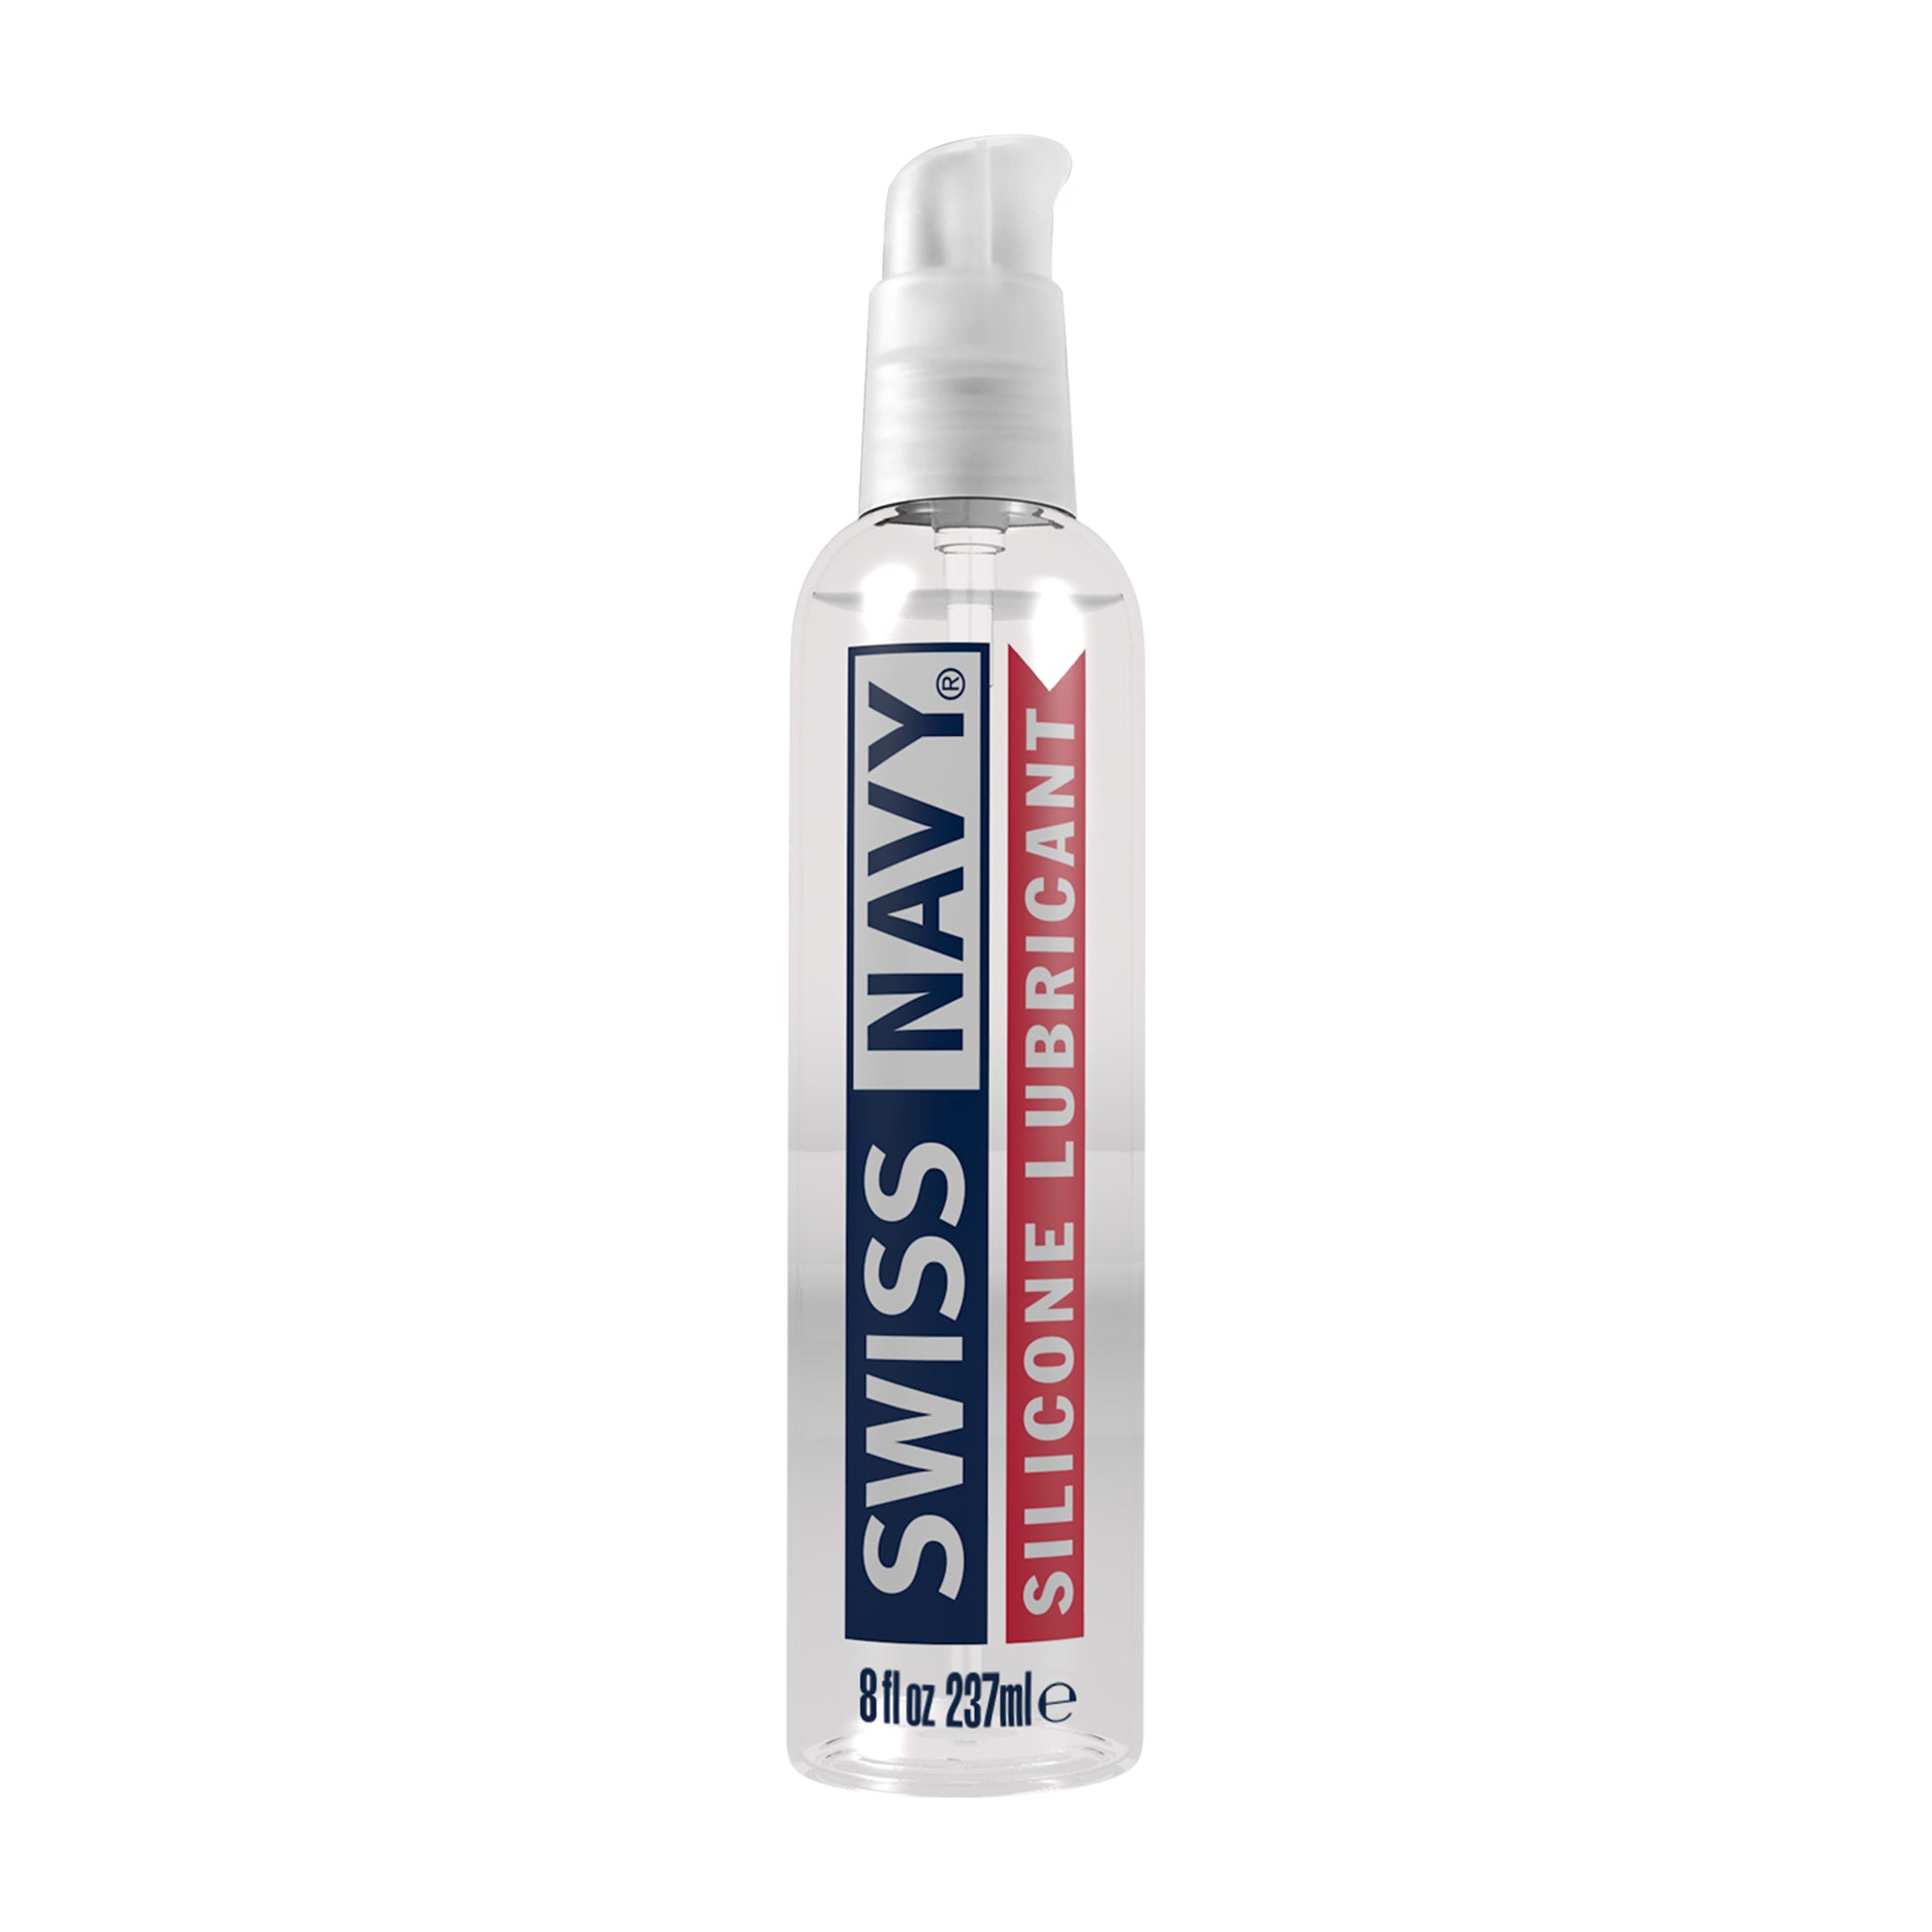 Swiss Navy® Silicone Lubricant